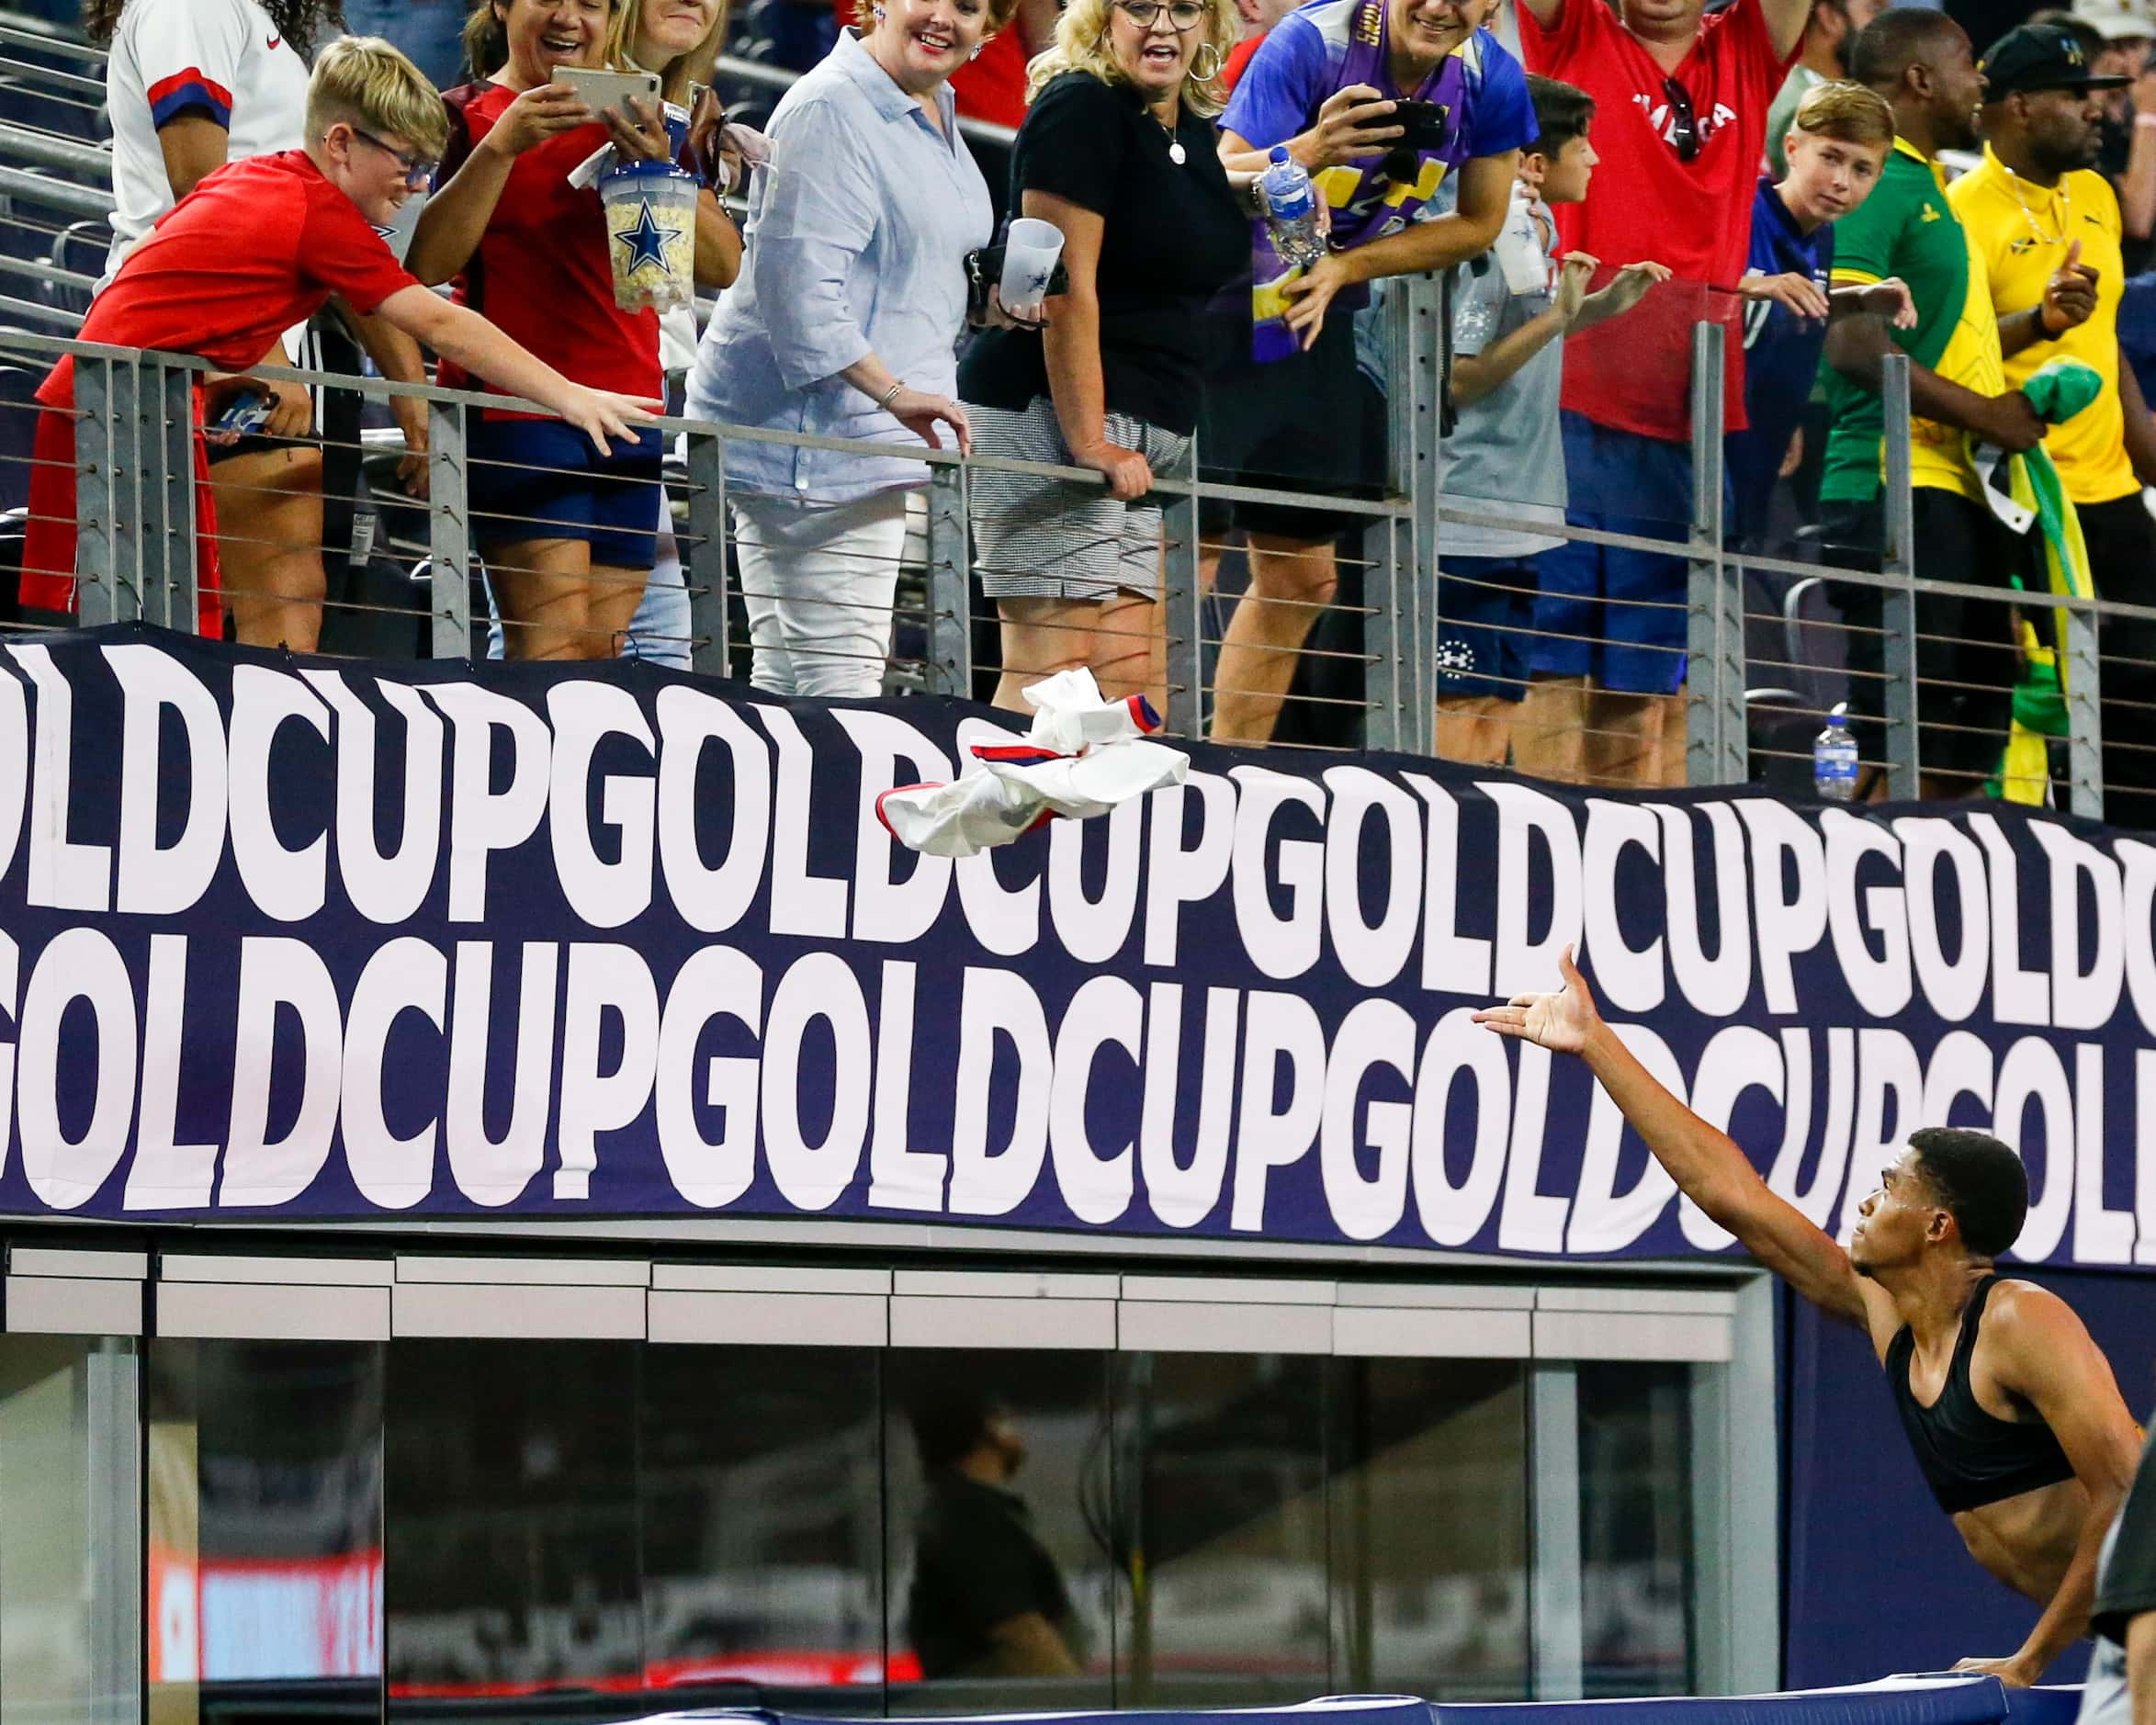 USA defender Reggie Cannon (2) tosses his jersey to a young fan after a CONCACAF Gold Cup...